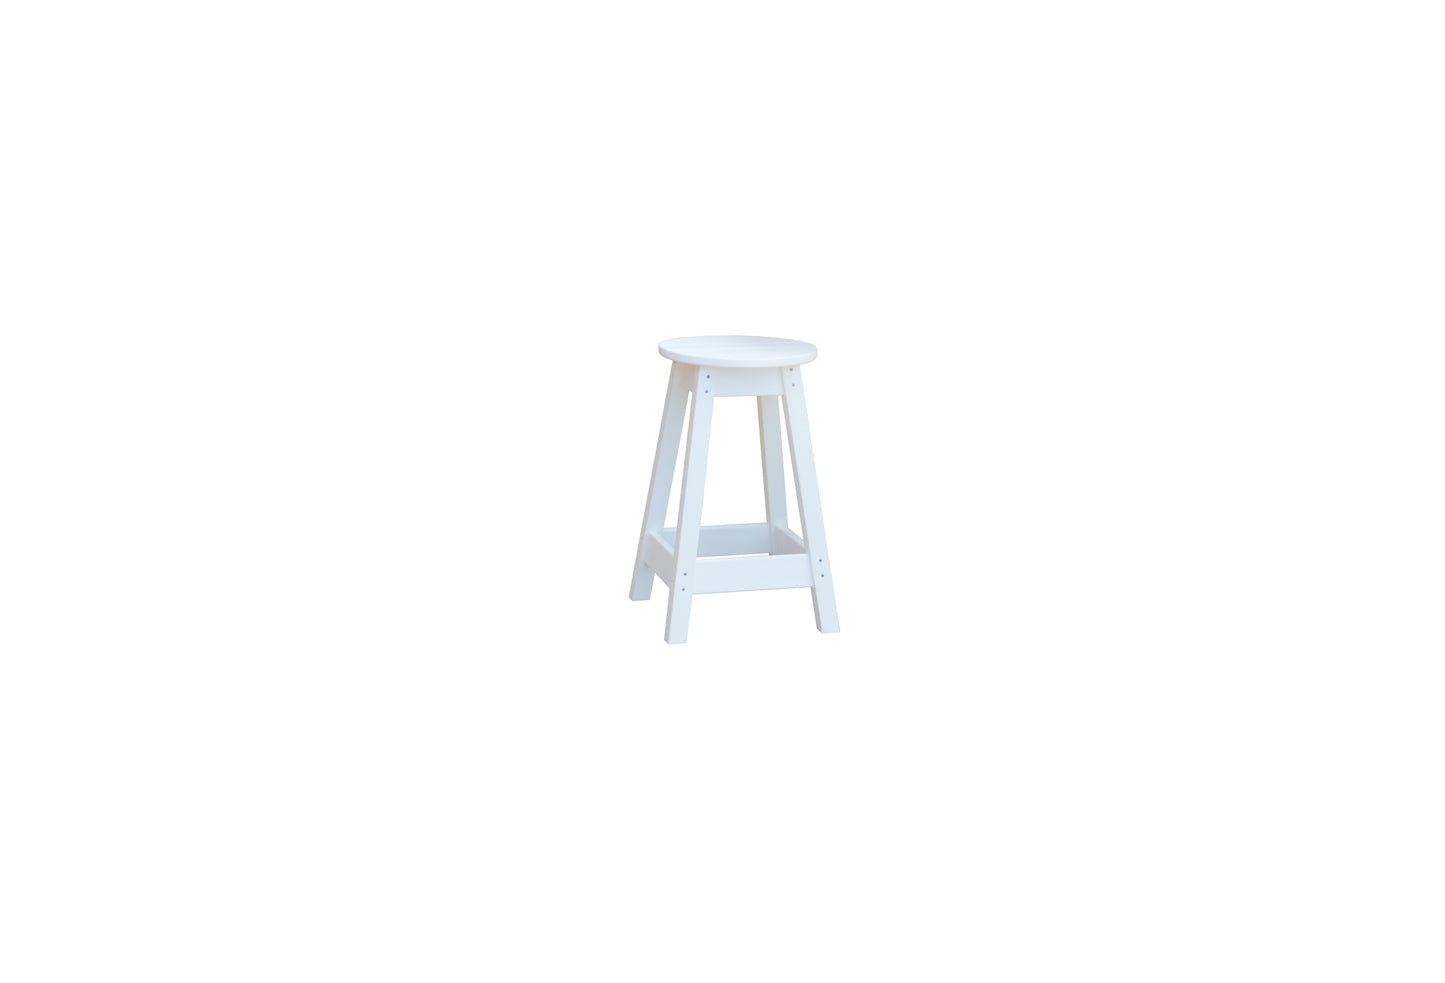 A&L Furniture Co. Recycled Plastic Round Bistro Stool - LEAD TIME TO SHIP 10 BUSINESS DAYS